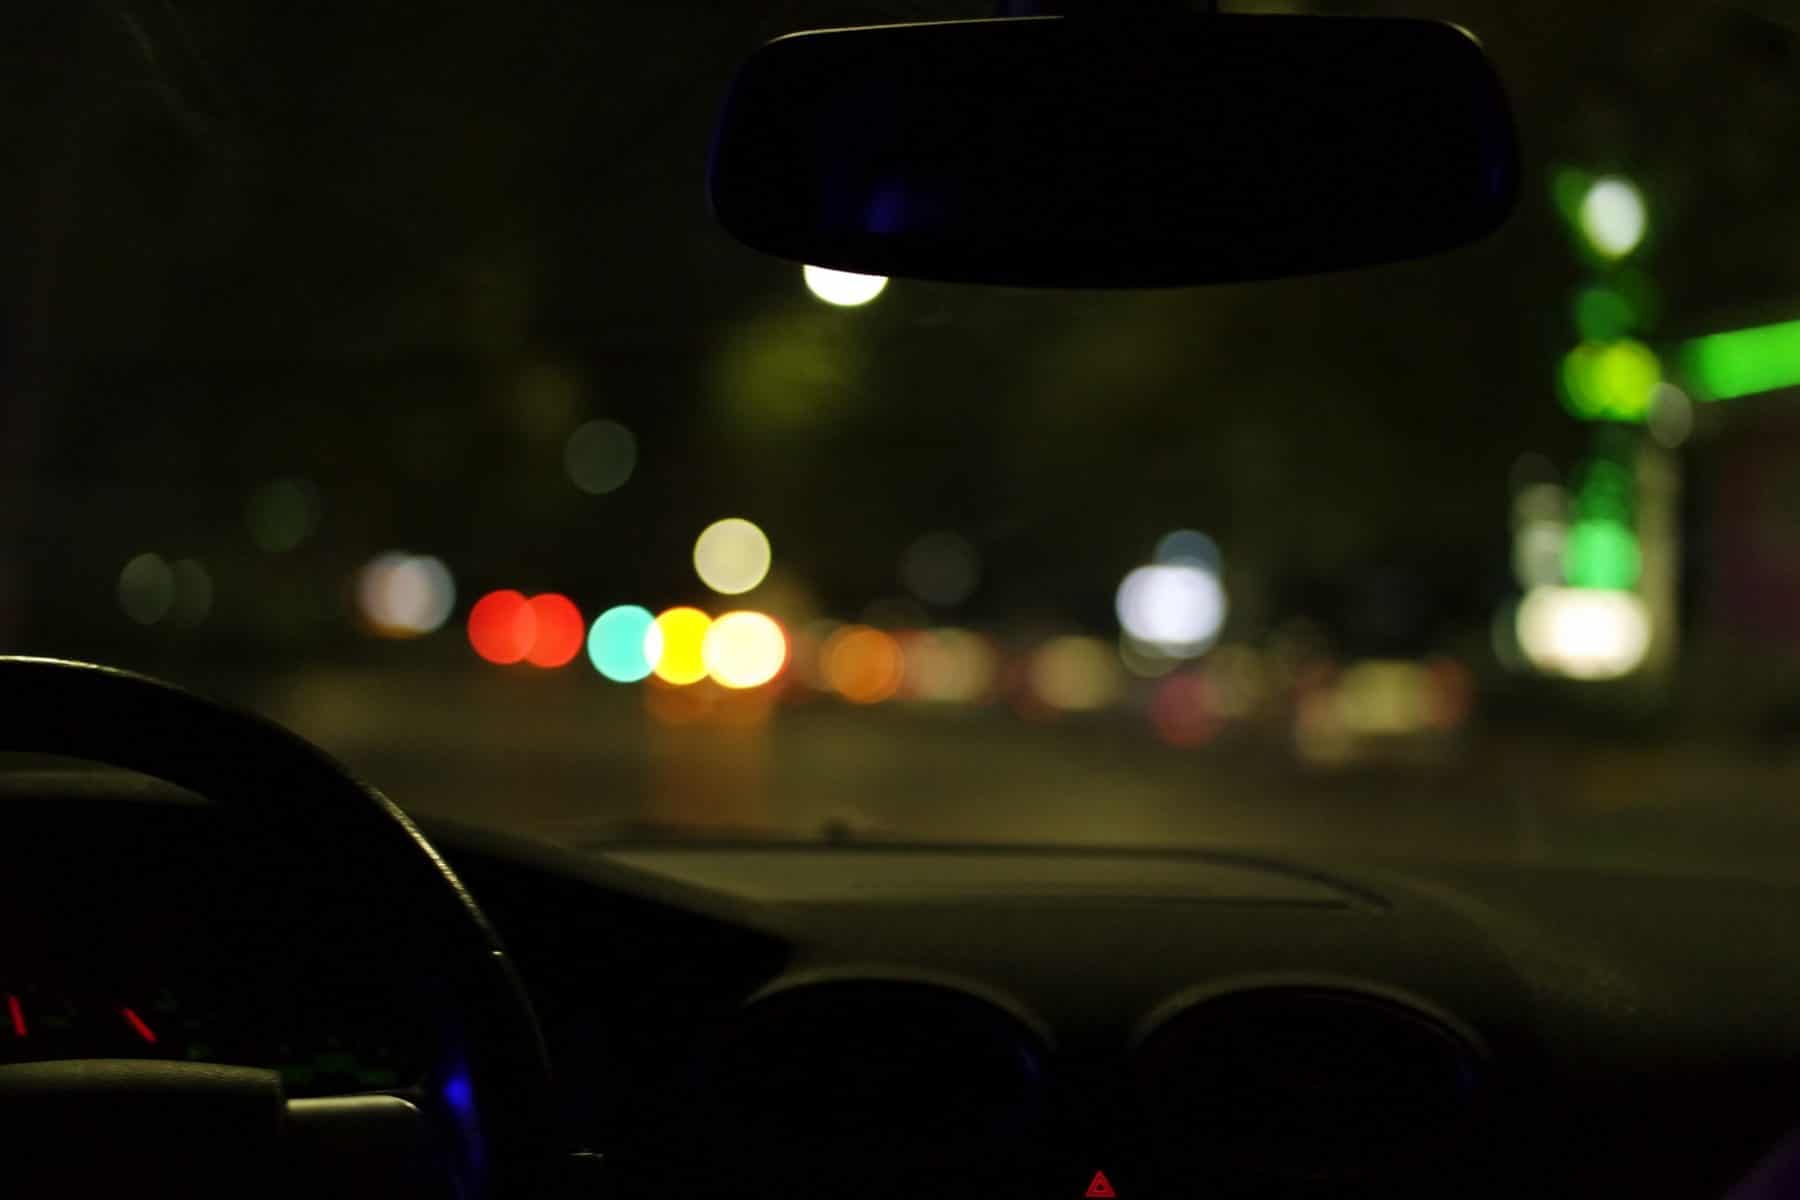 Driving in the dark can be a challenge, especially on Michigan roads. If you have trouble seeing in the dark, make an appointment to see one of our eye doctors in Flint, Lapeer, Grand Blanc, Oxford, or Fenton for a thorough eye examination.